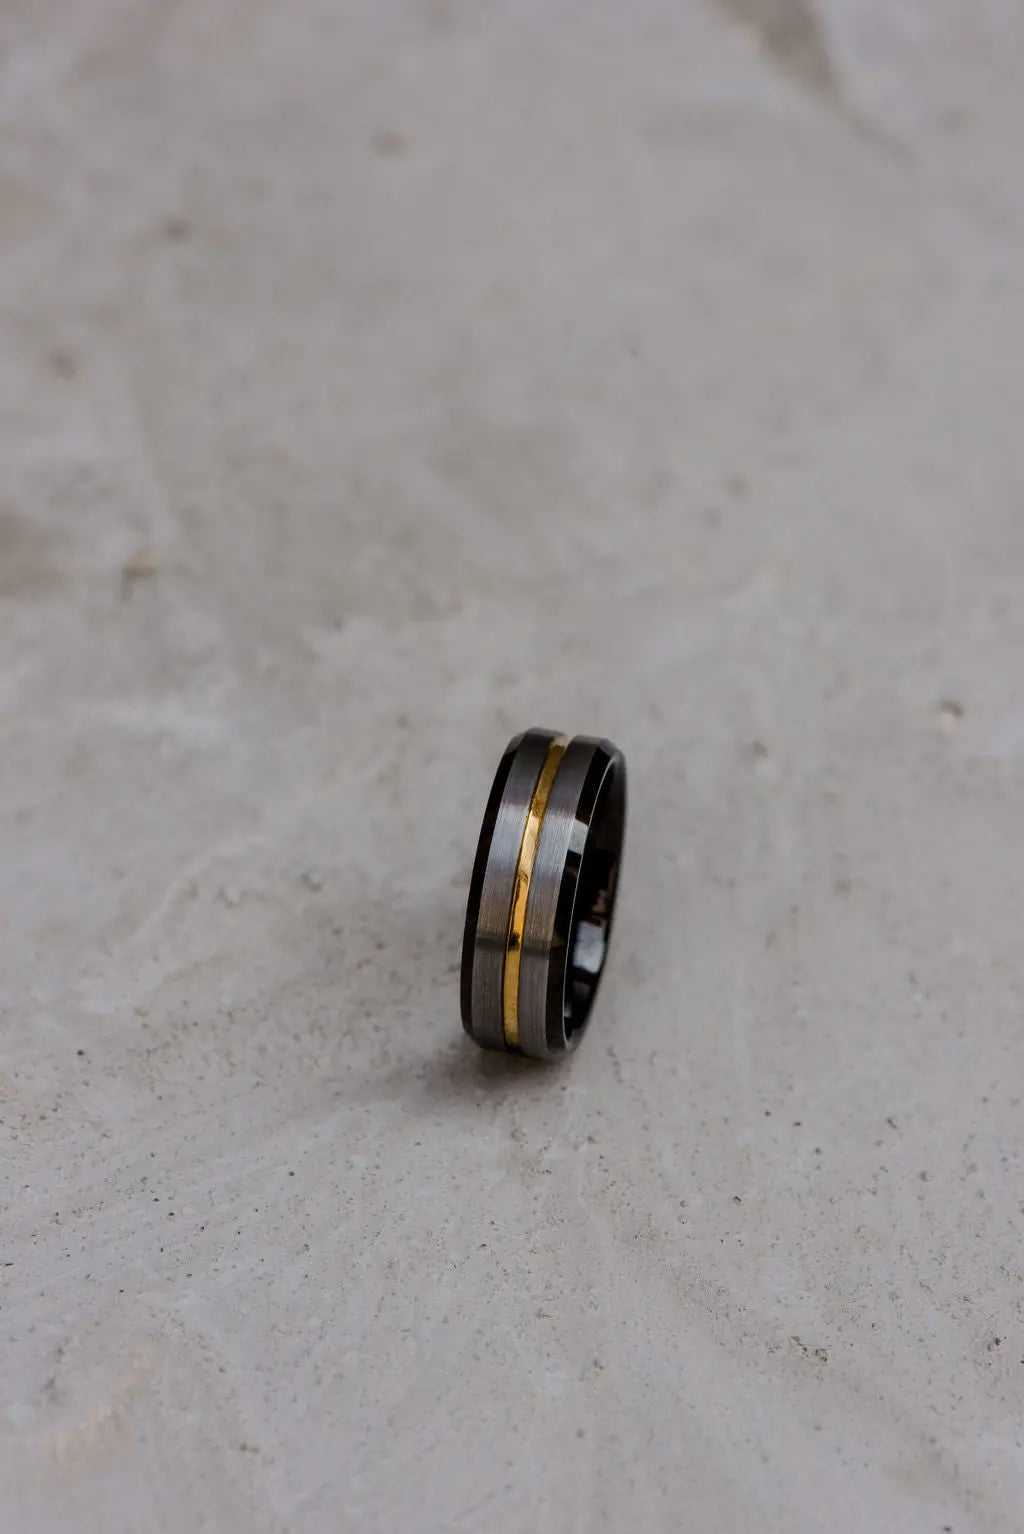 Tungsten Carbide Men's Wedding Ring with Gold Inlay on Light Backdrop